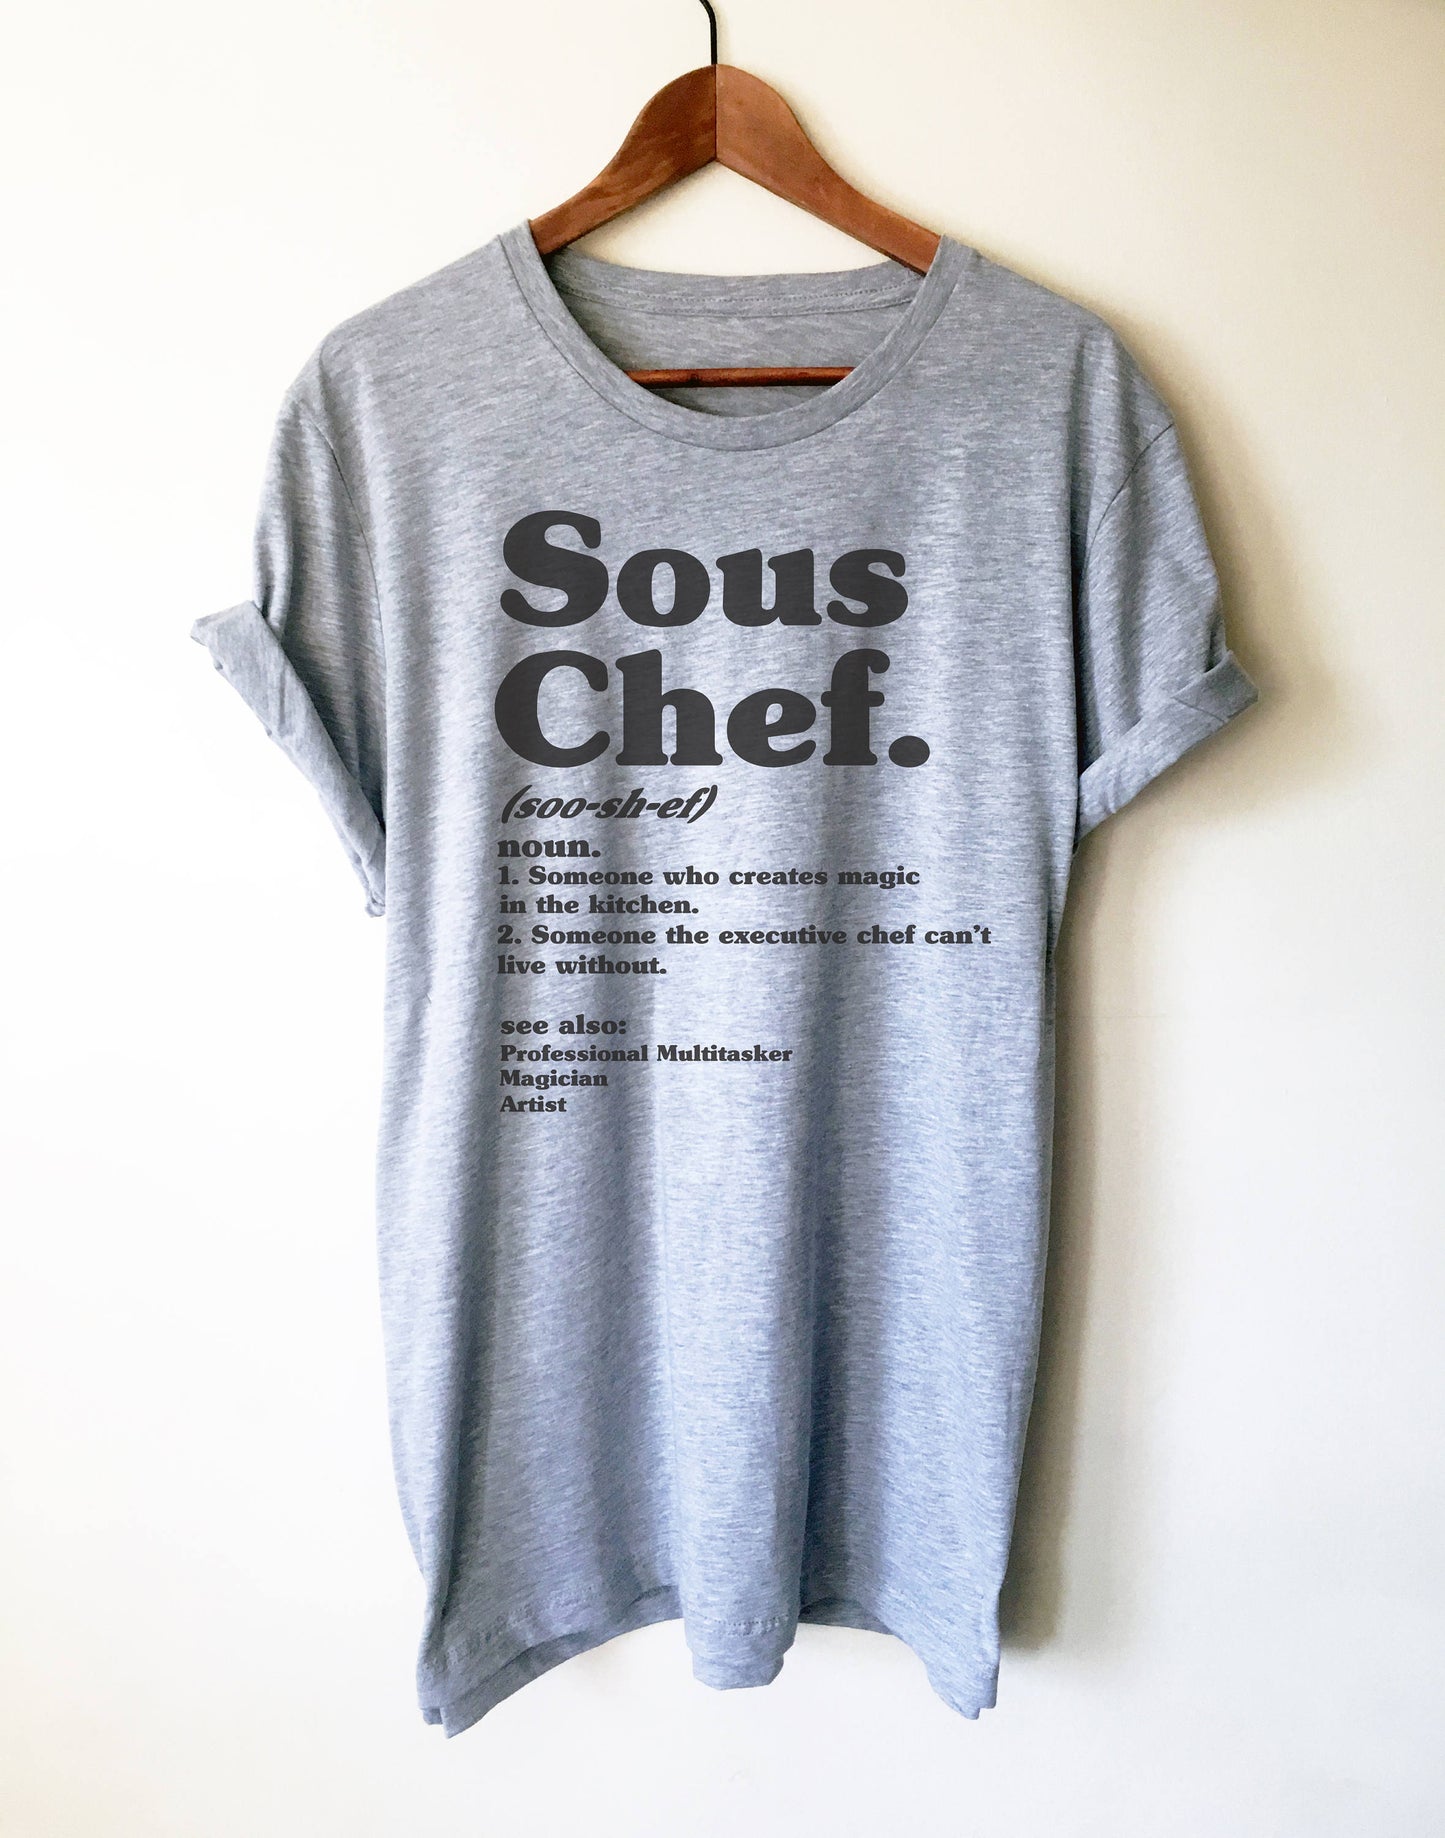 Sous Chef Definition Unisex Shirt - Chef shirt, Chef gift, Cooking shirt, Foodie shirt, Cooking gift, Culinary gifts, Food shirt, Sous chef